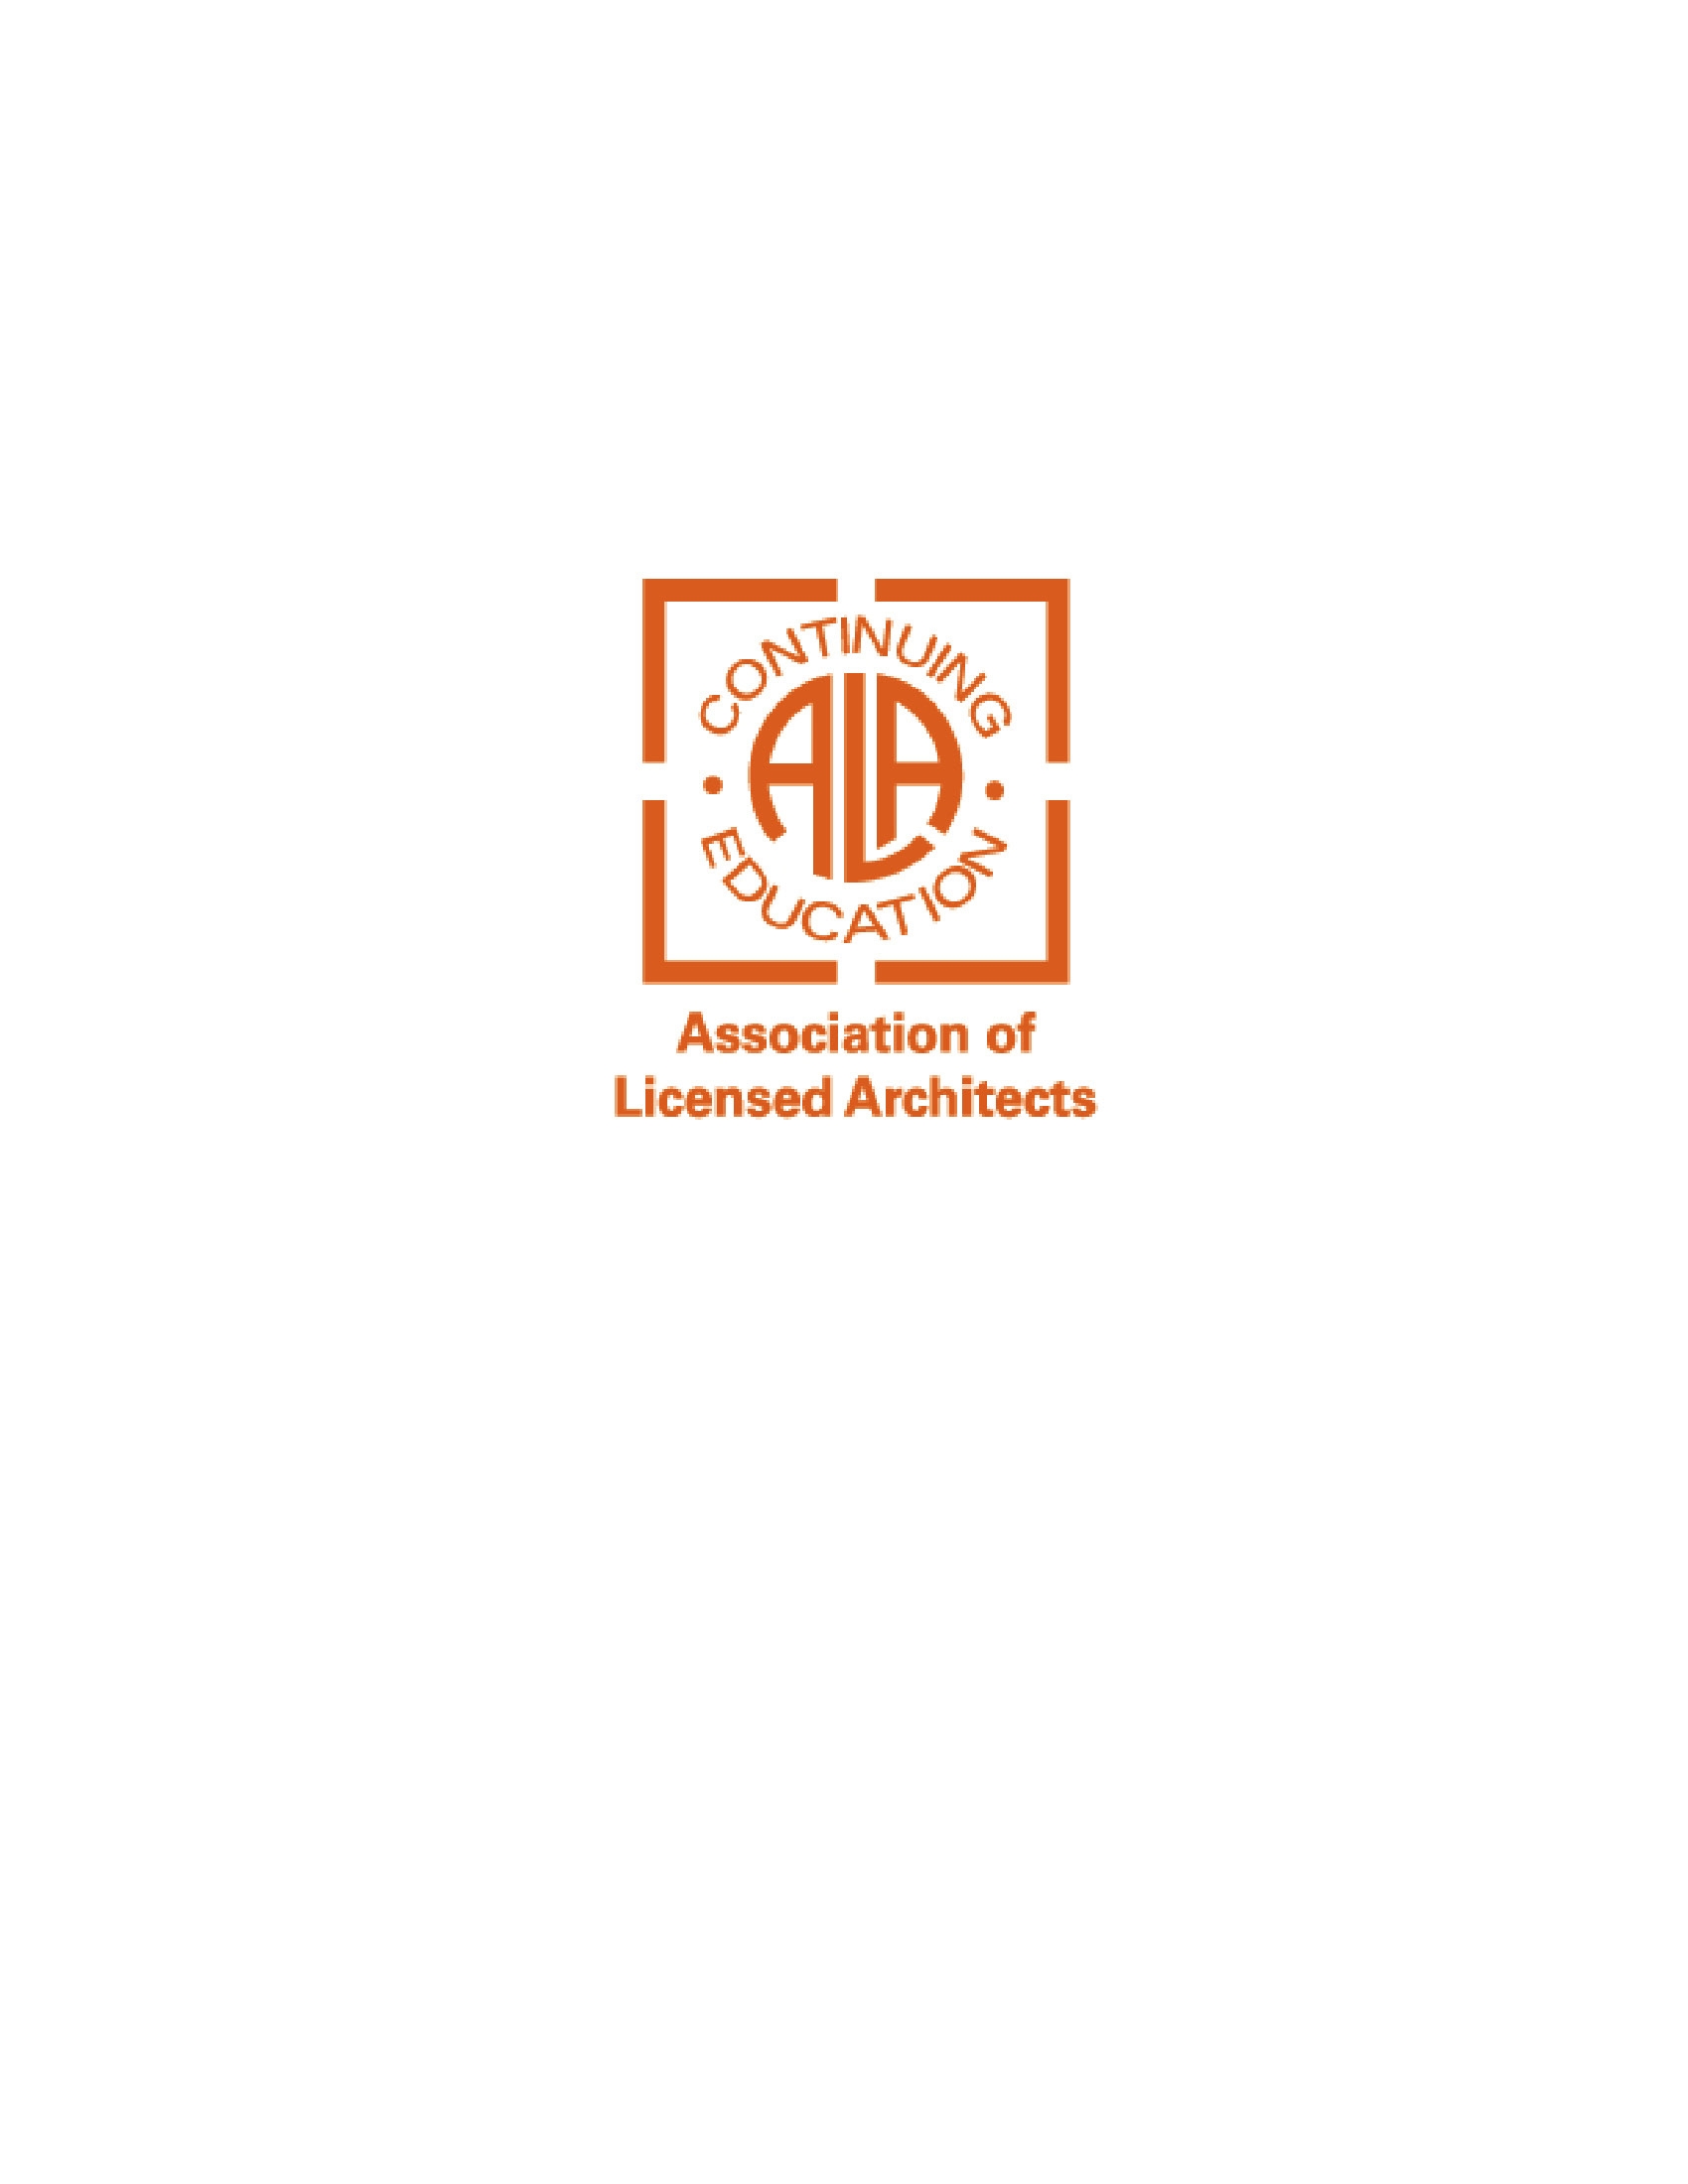 Recognized for CEs by Association of Licensed Architects